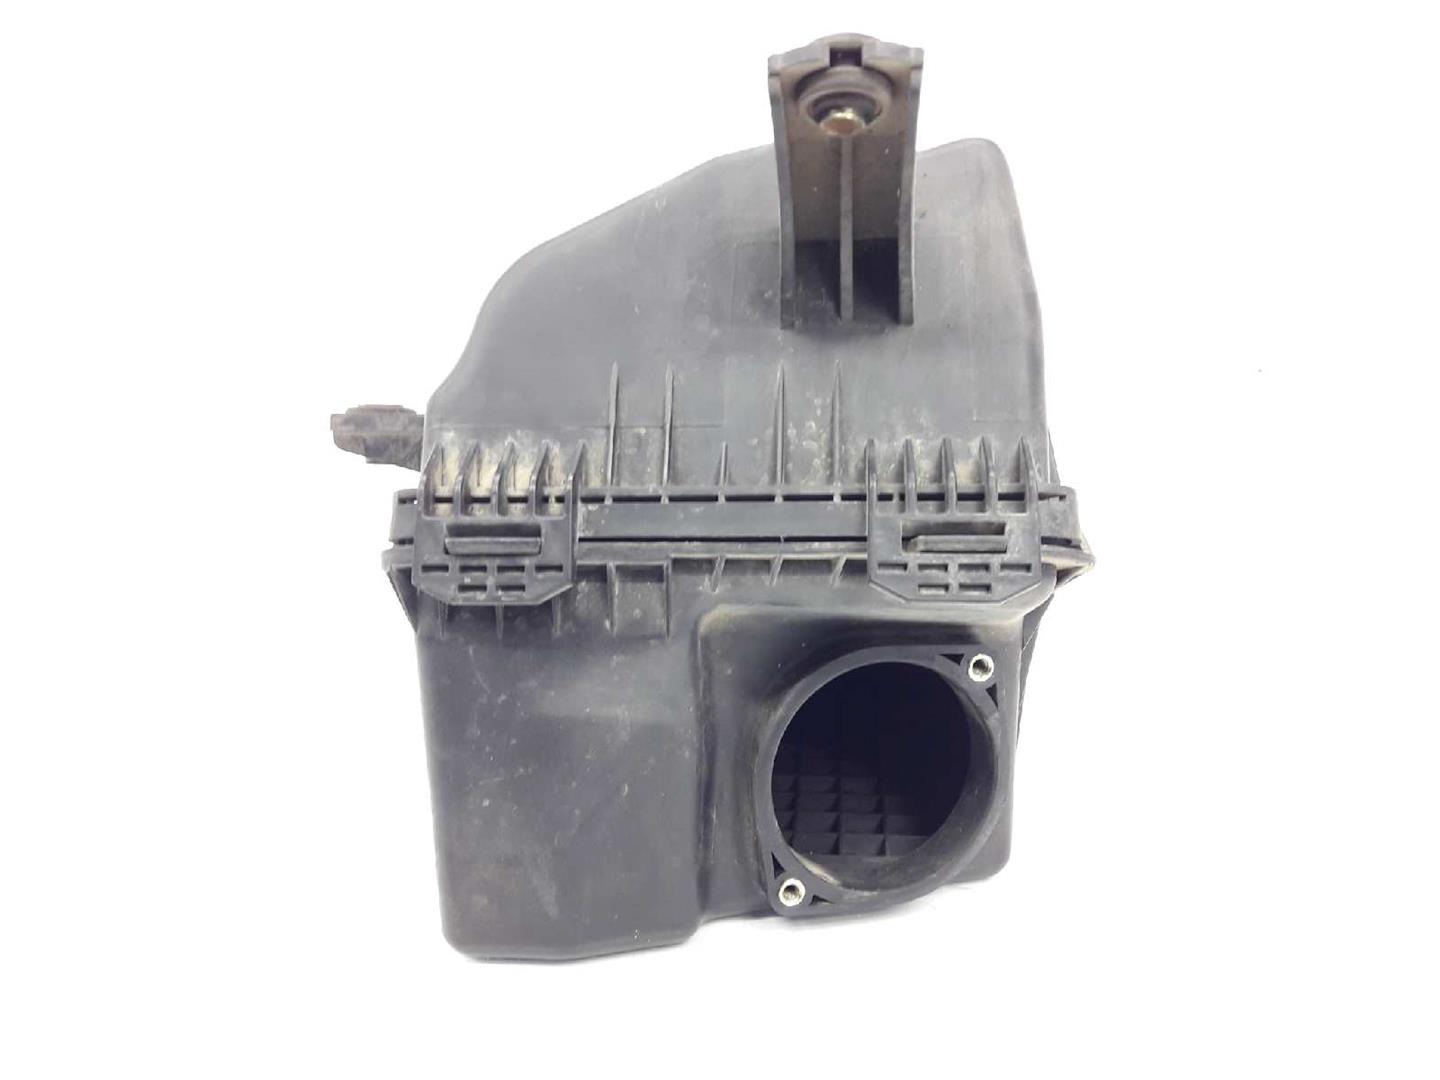 HYUNDAI Terracan 2 generation (2004-2009) Other Engine Compartment Parts 28112H1915, 28111H1930 19706856